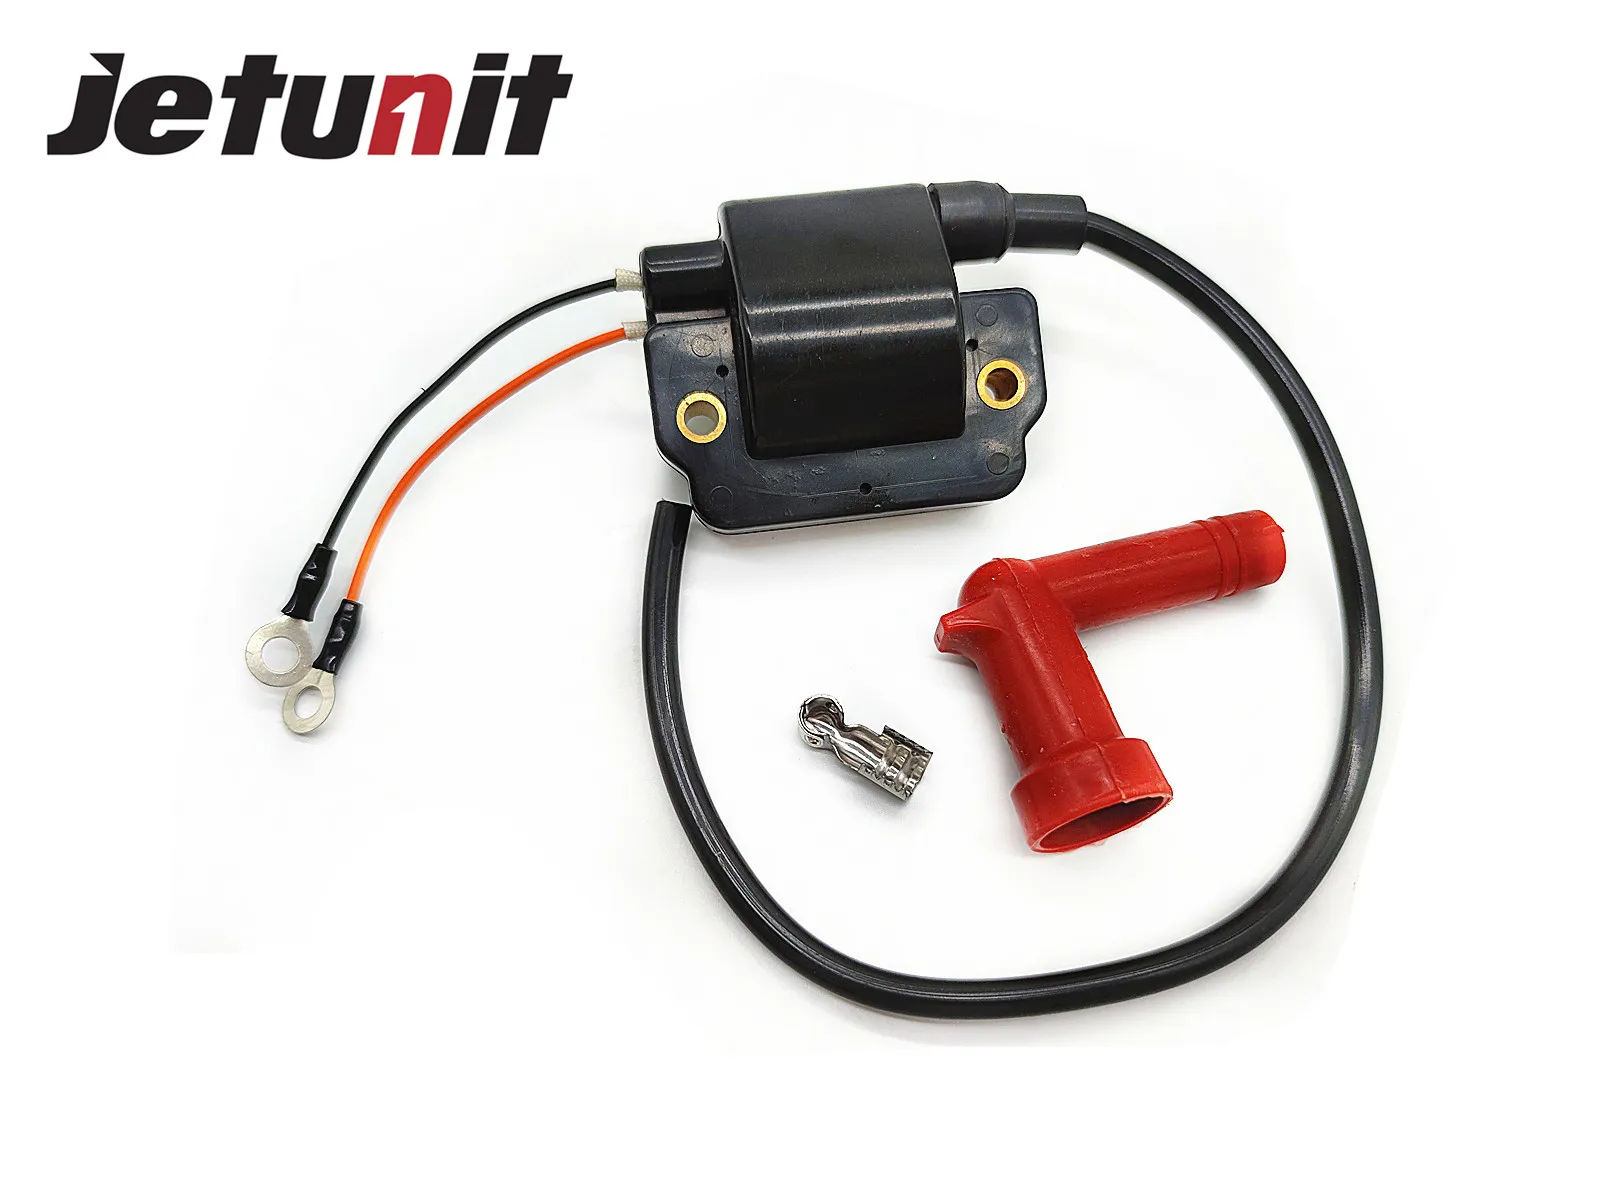 Outboard Ignition Coil For Yamaha 697-85570-11-00 697-85570-10-00 55HP(1992-1995)60HP(1996-2001,2004 2006) 70HP 90HP